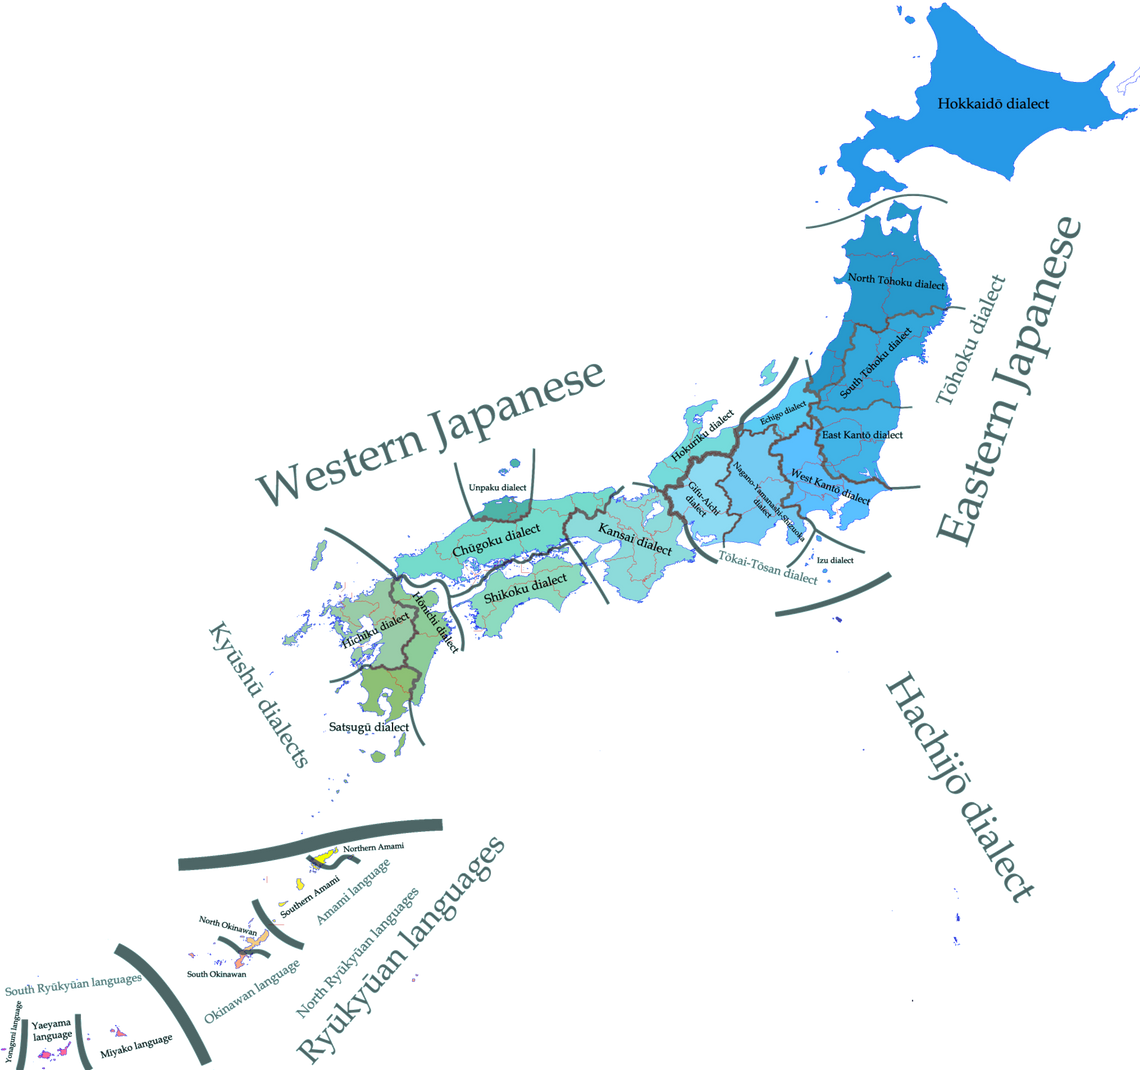 Map of Japanese dialects